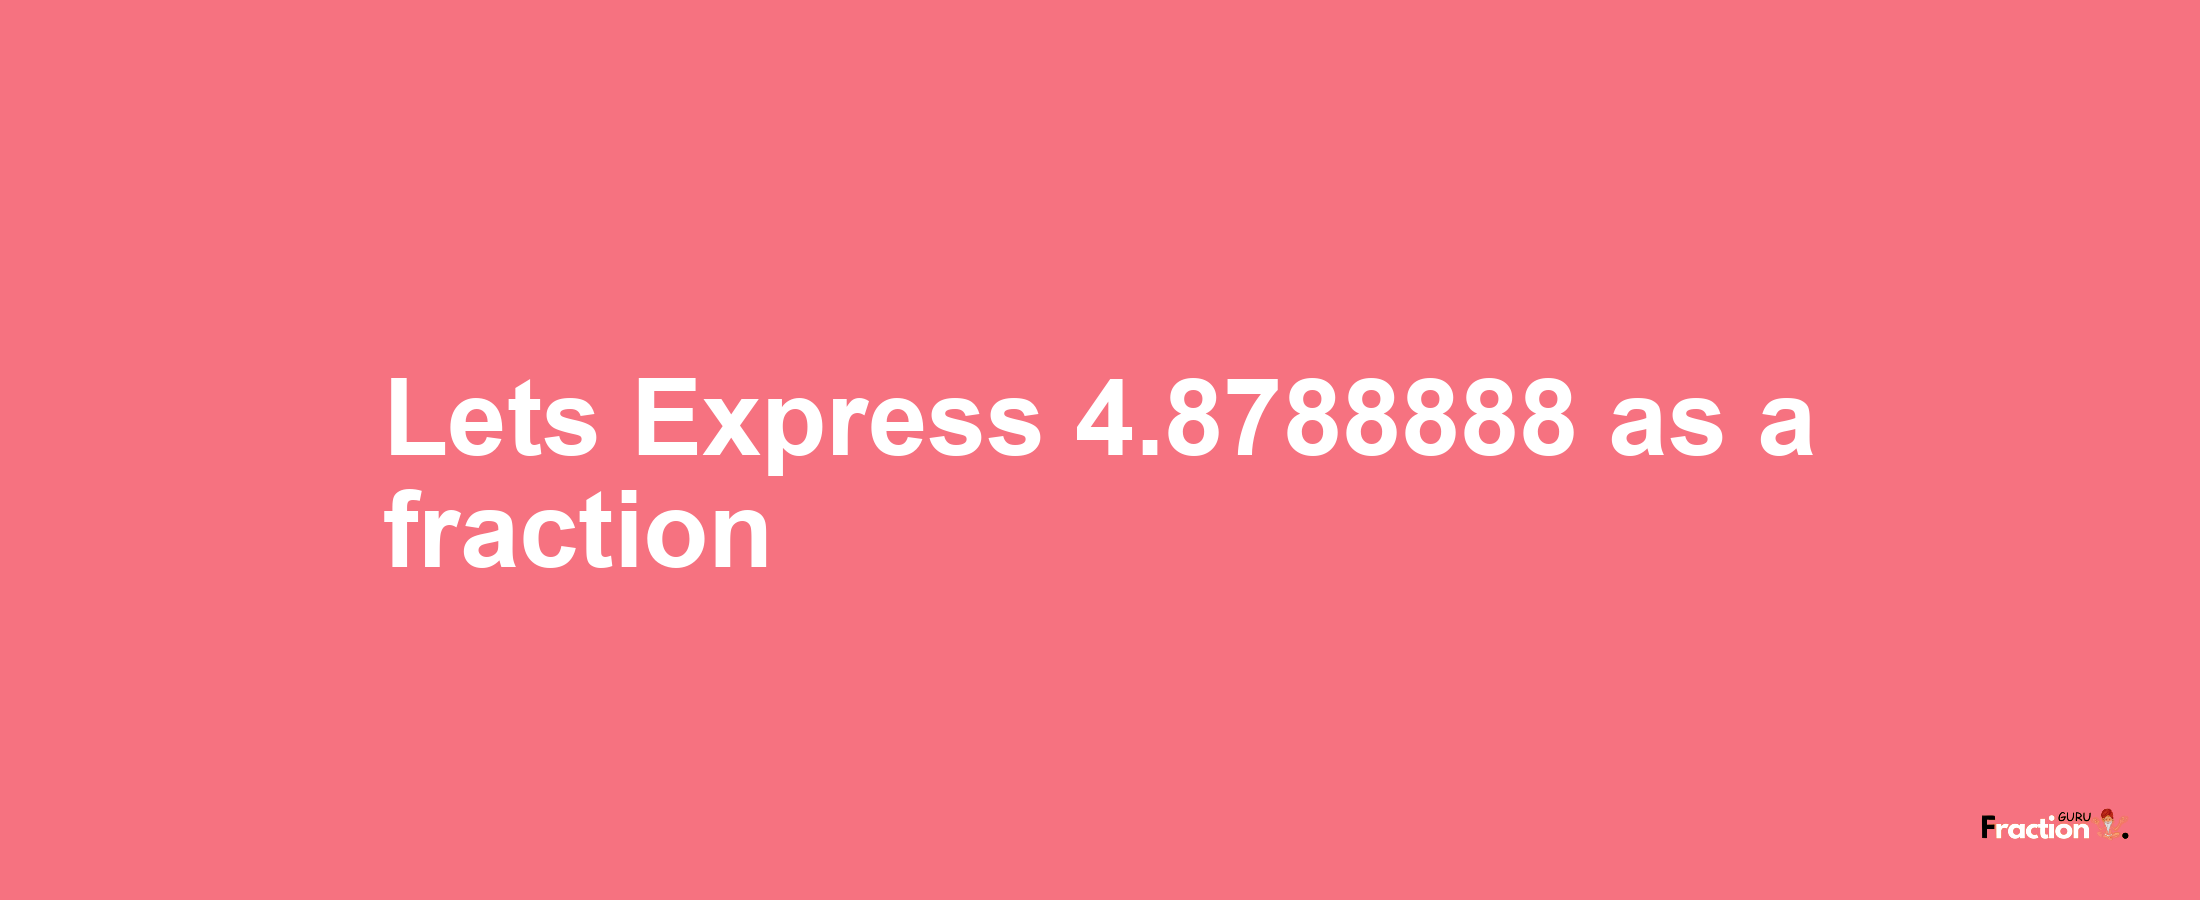 Lets Express 4.8788888 as afraction